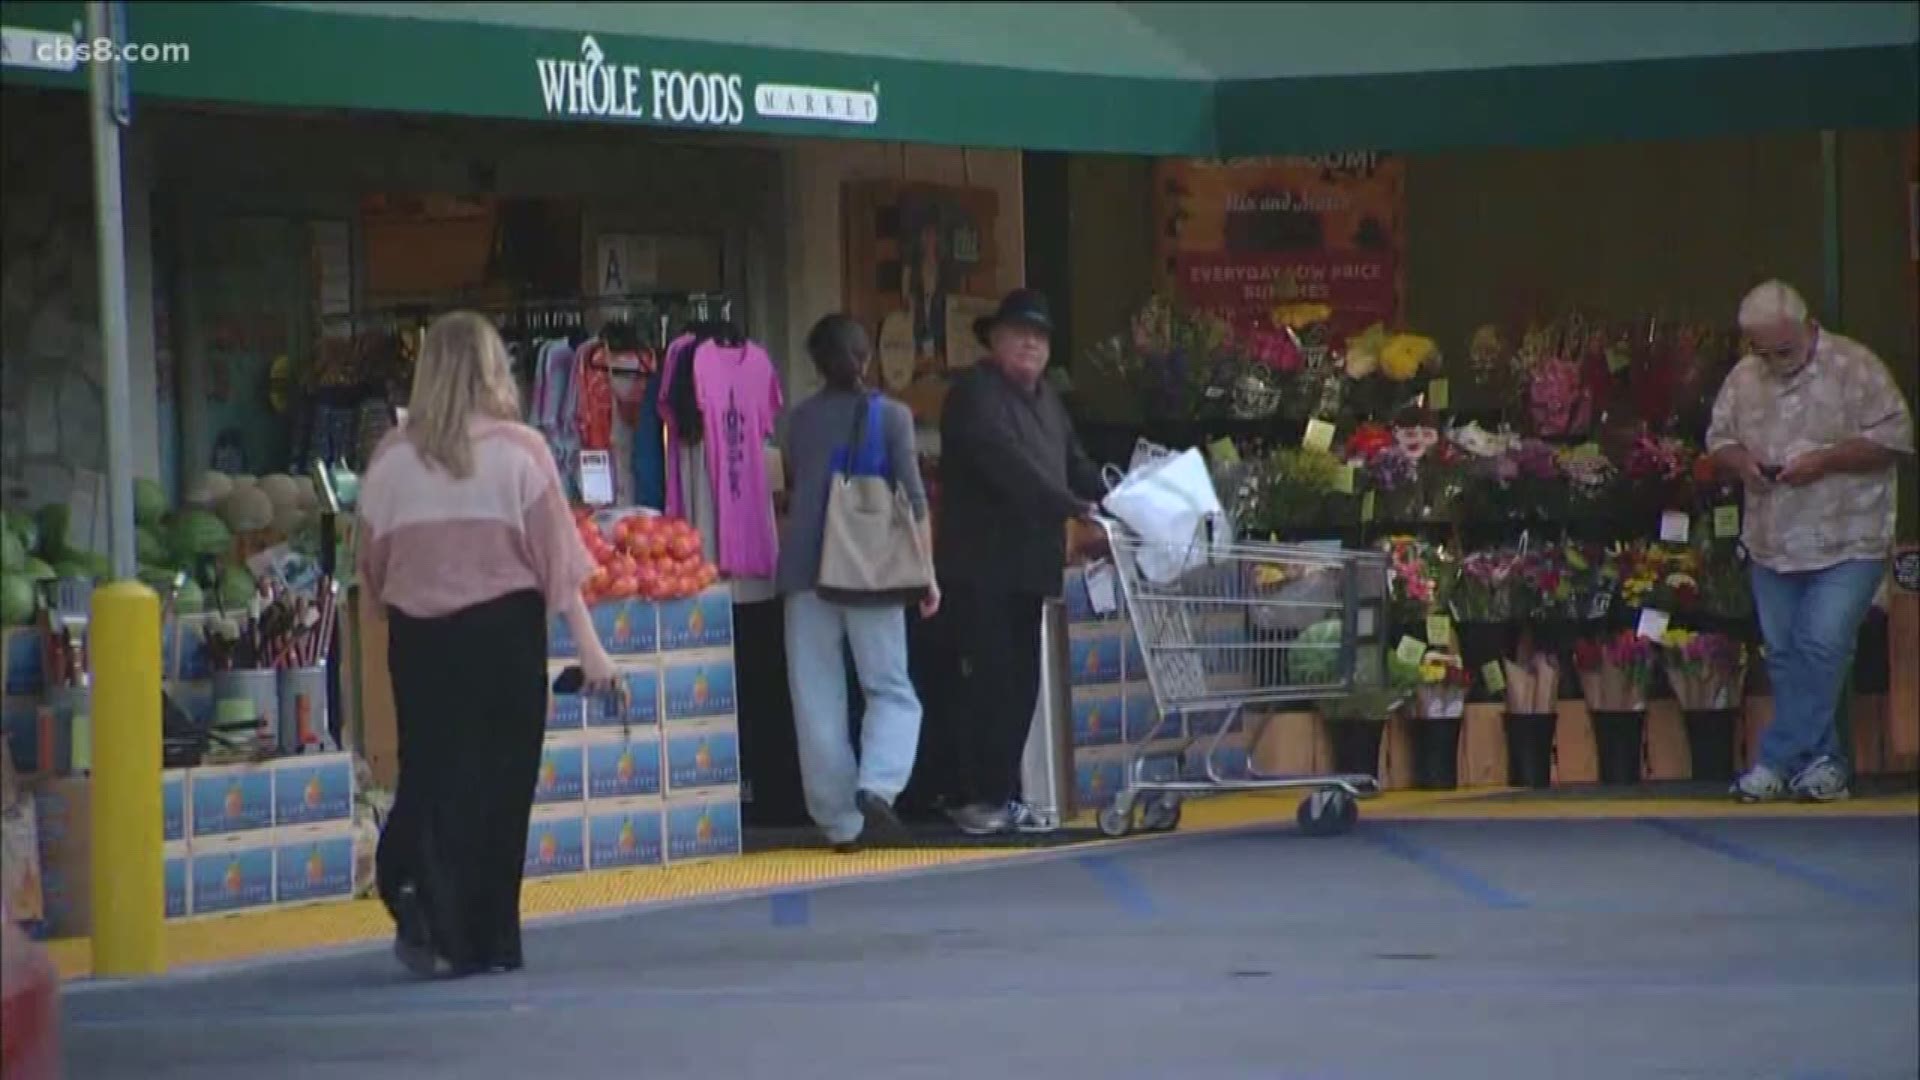 Nationally, Whole Foods workers are expected to walk out on the job Tuesday.